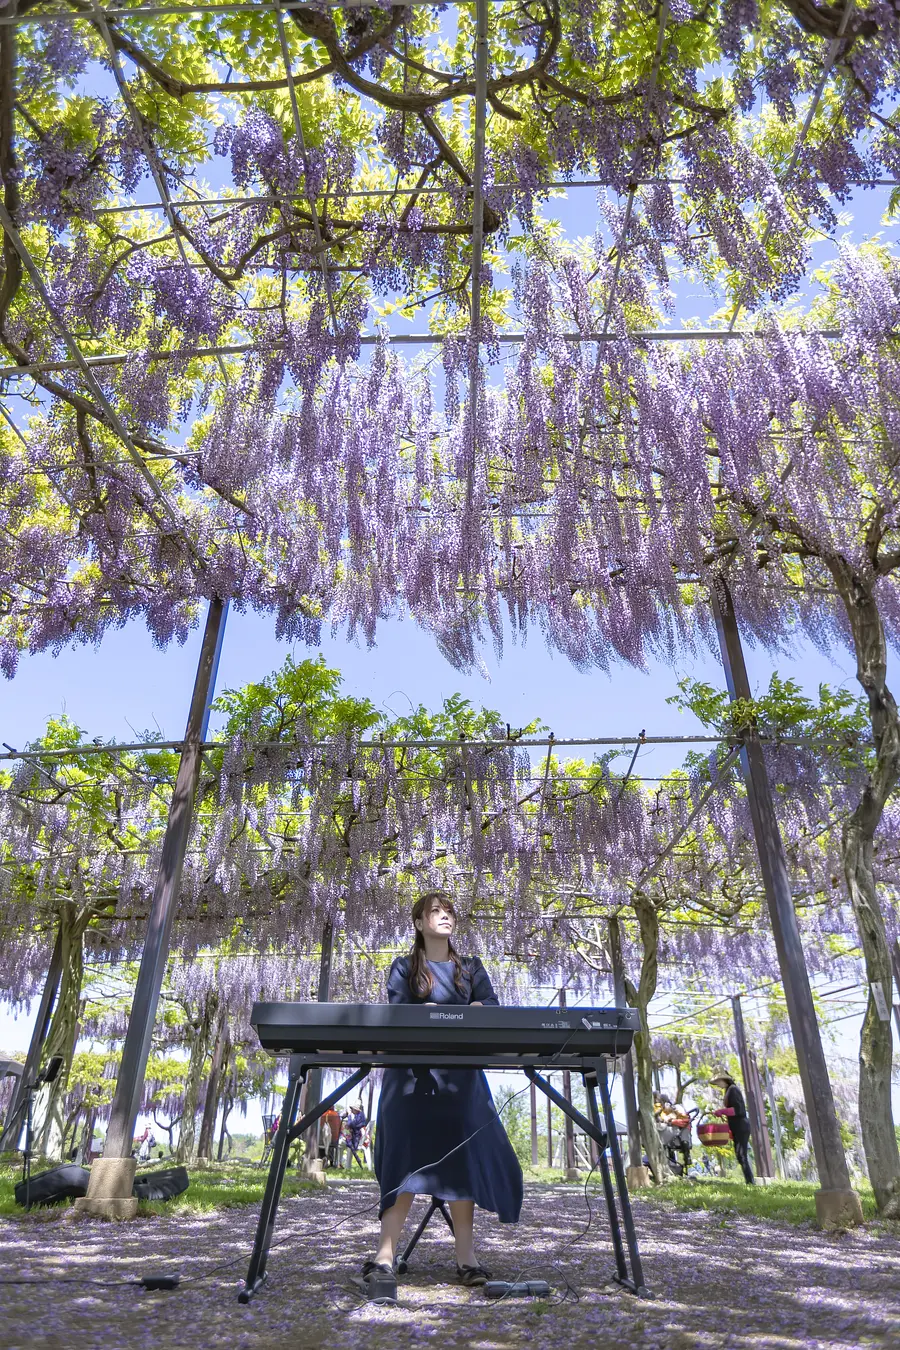 Lunchtime concert under the wisteria trellis